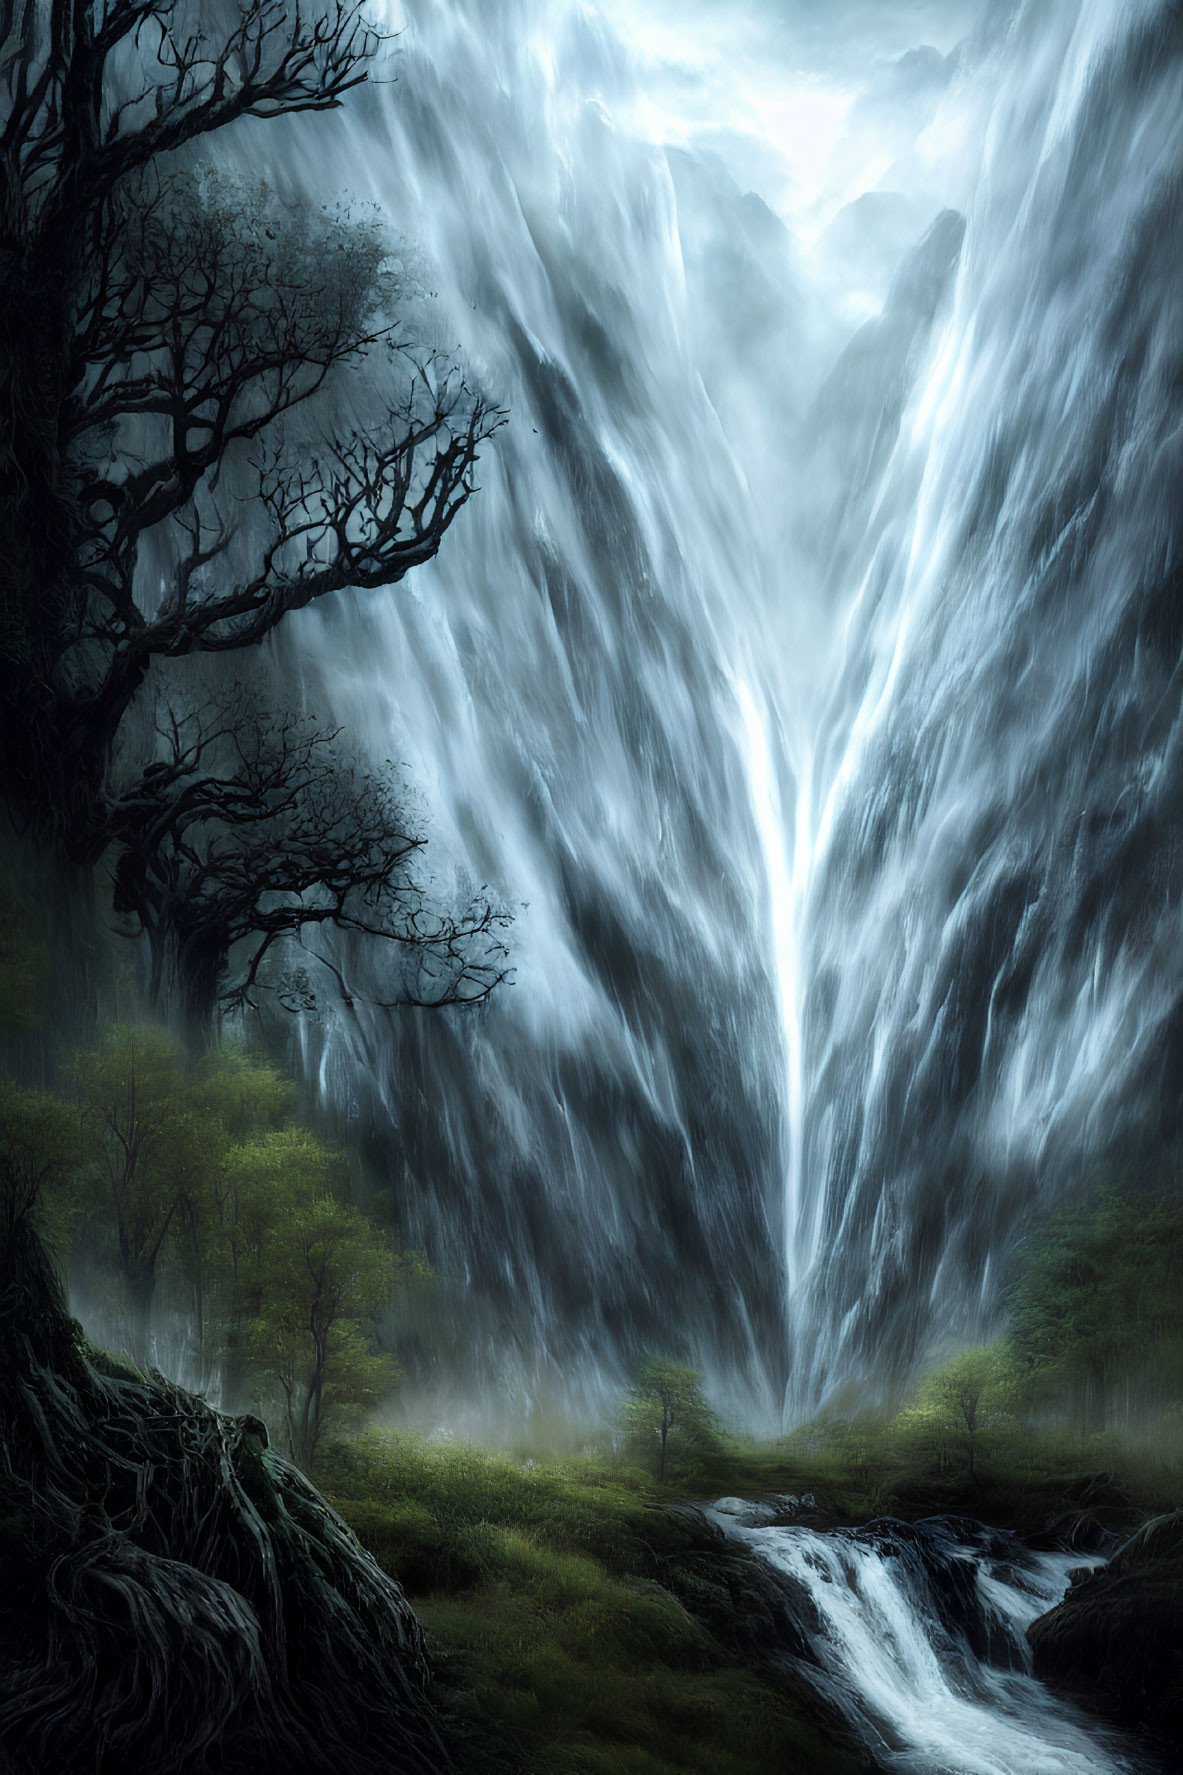 Majestic waterfall in misty mountain landscape with lush greenery